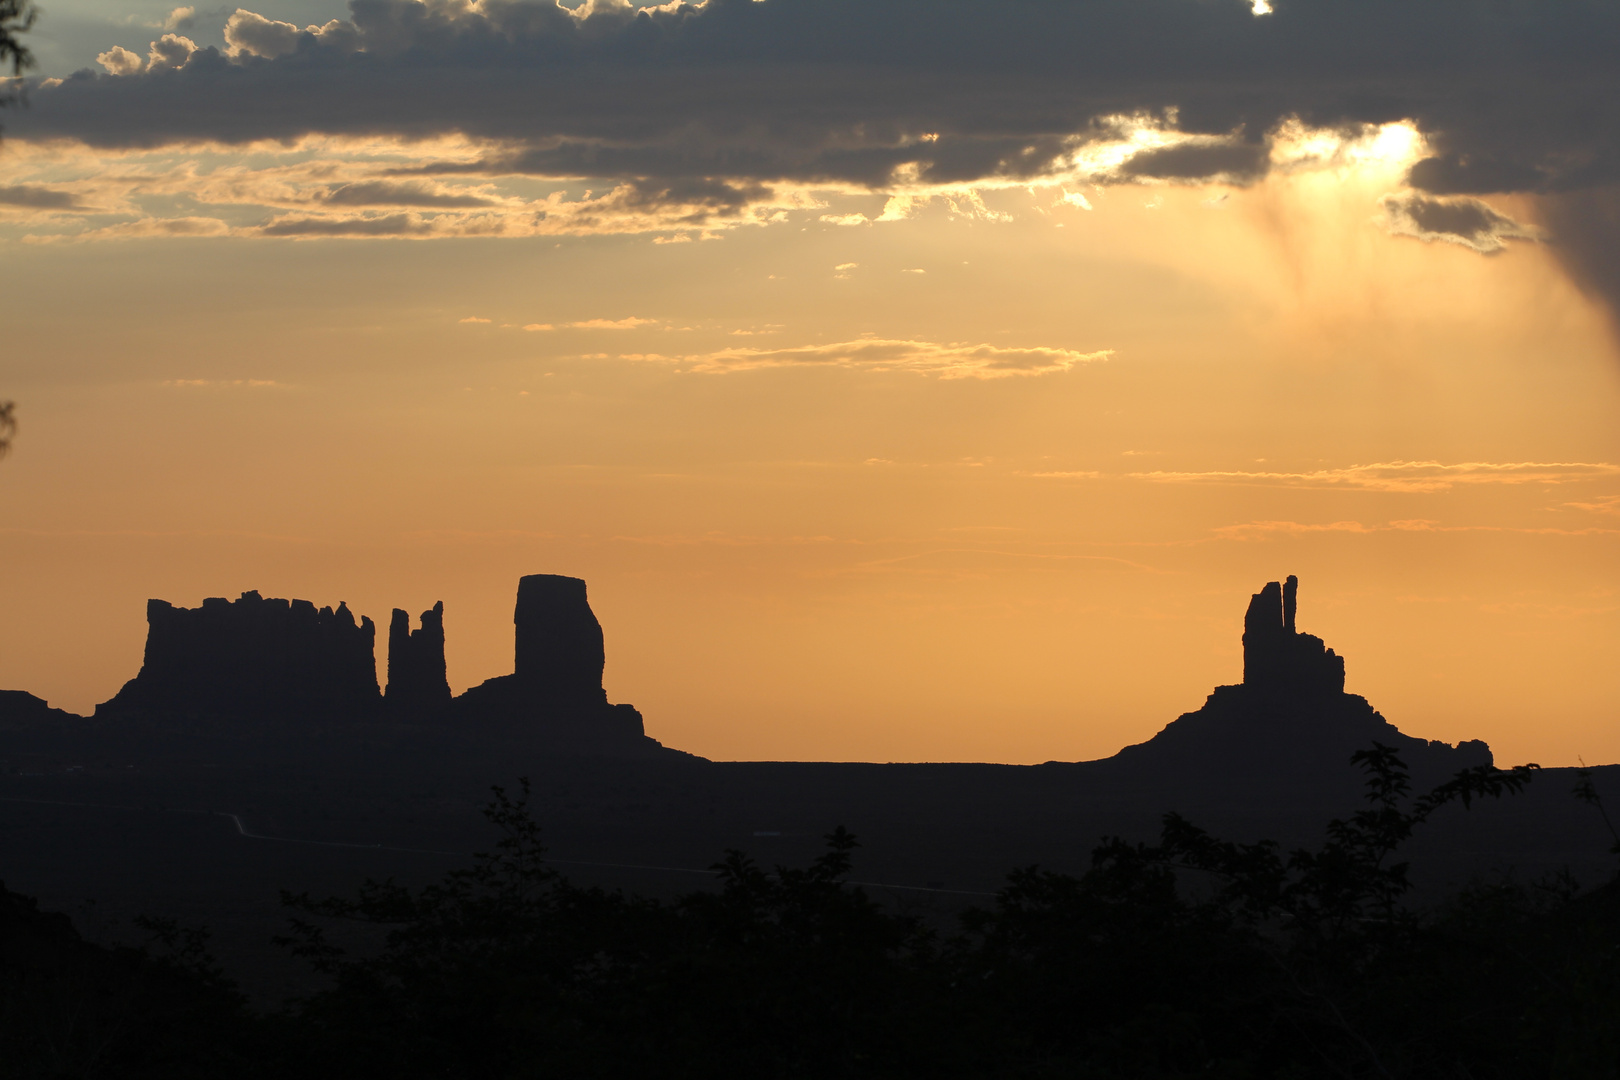 Sunset at Monument Valley / Goulding Campsite